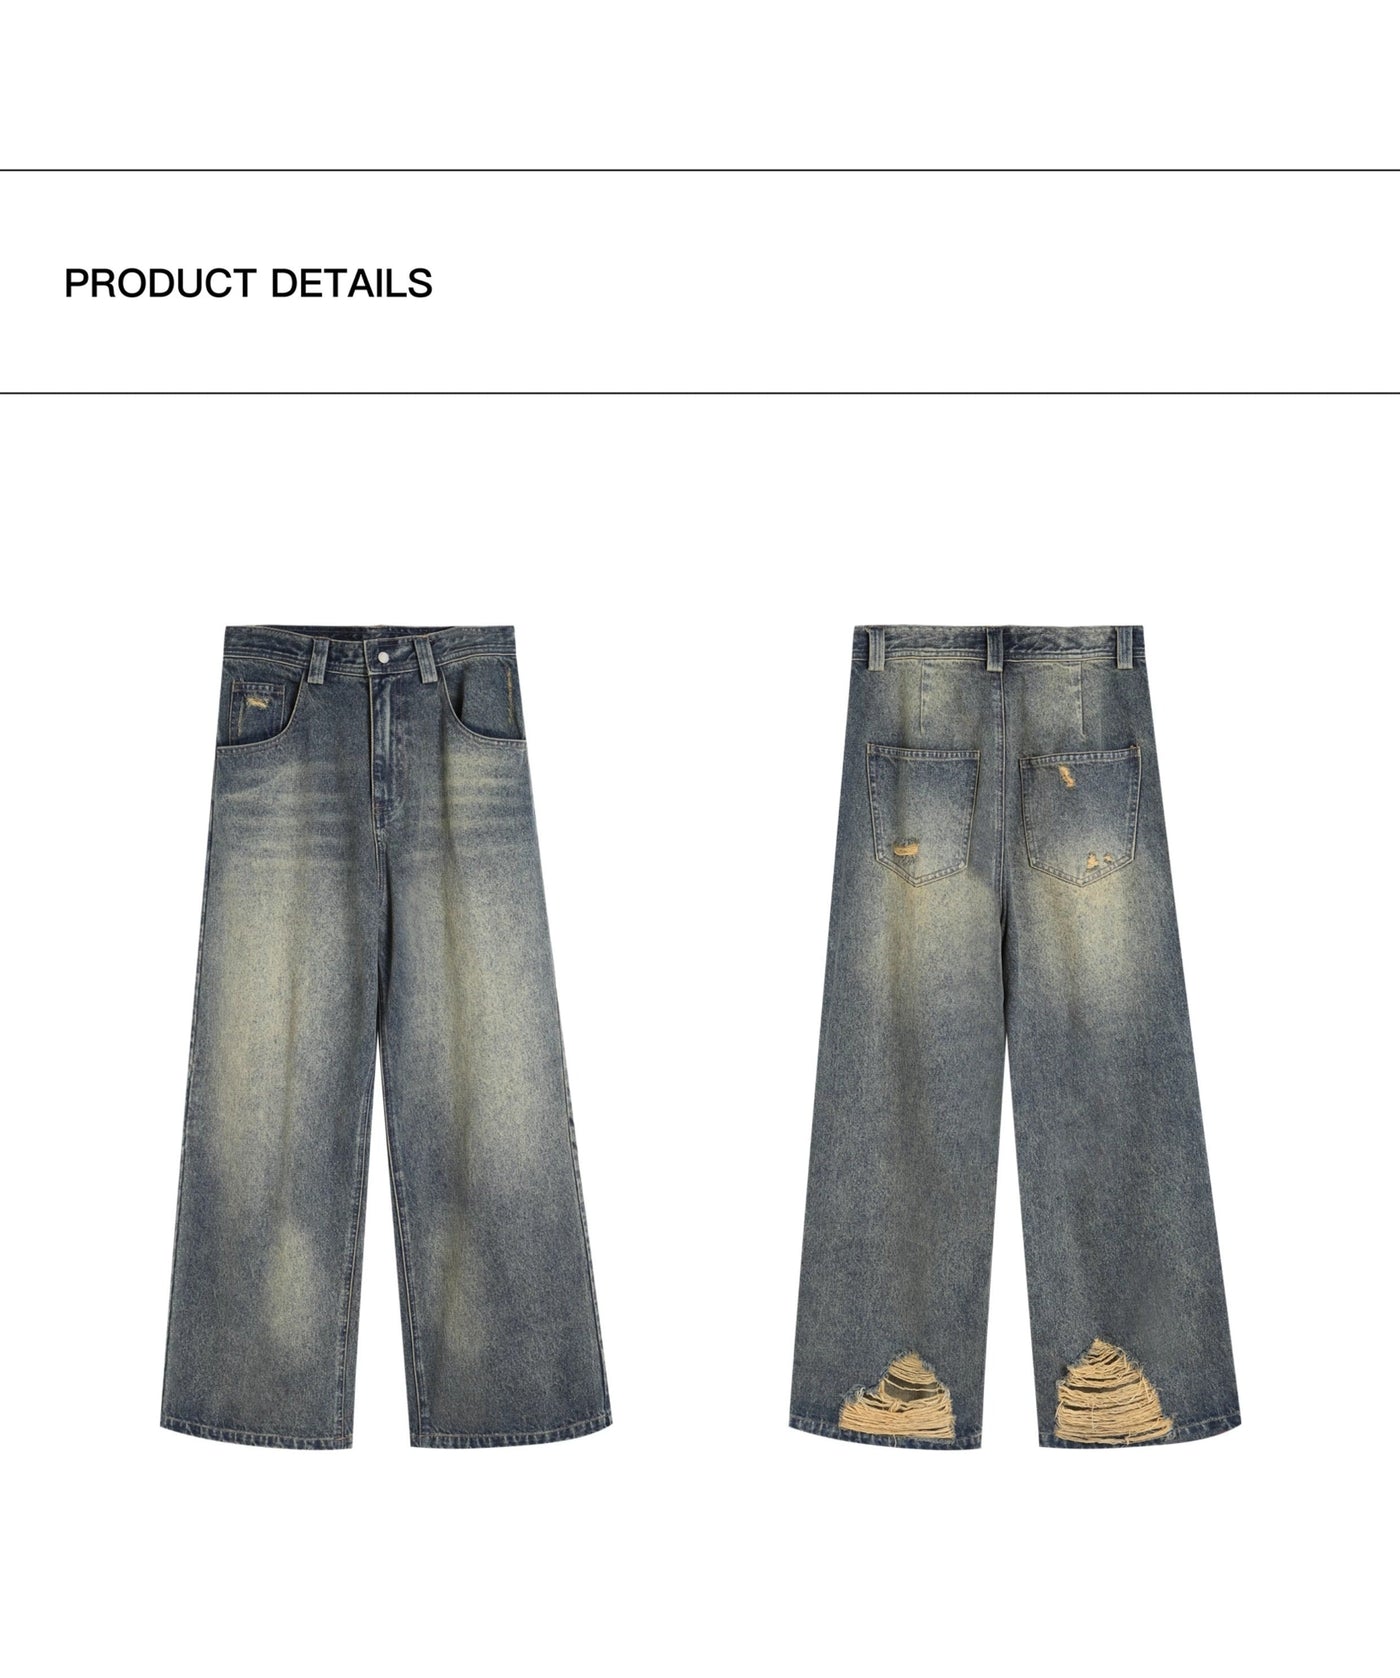 Faded & Distressed Straight Jeans Korean Street Fashion Jeans By 49PERCENT Shop Online at OH Vault